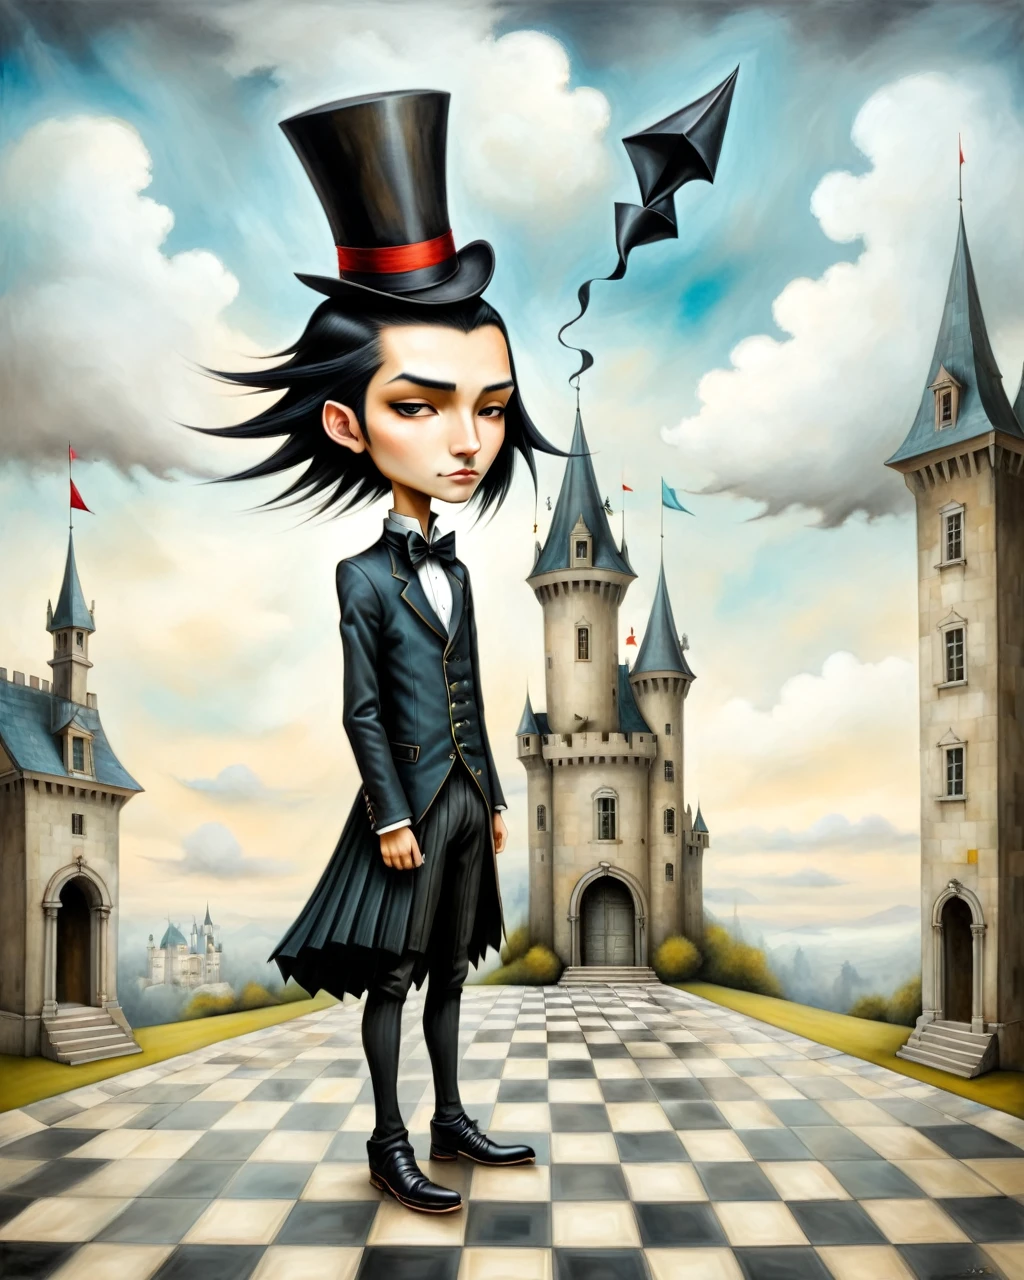 painting of a boy with top hat native american big nose long black hair standing in a courtyard castle on a cloud castle in the sky, mansion checkered floor origami style in the style of esao andrews,esao andrews style,esao andrews art,esao andrewsa  esao andrews, andrews esao artstyle, inspired by Esao Andrews, esao andrews ornate, by Esao Andrews, esao andrews, inspired by ESAO, by ESAO,  earley, esao andrews, benjamin lacombe, 1boy, in the style of esao andrews, esao andrews . paper art, pleated paper, folded, origami art, pleats, cut and fold, 